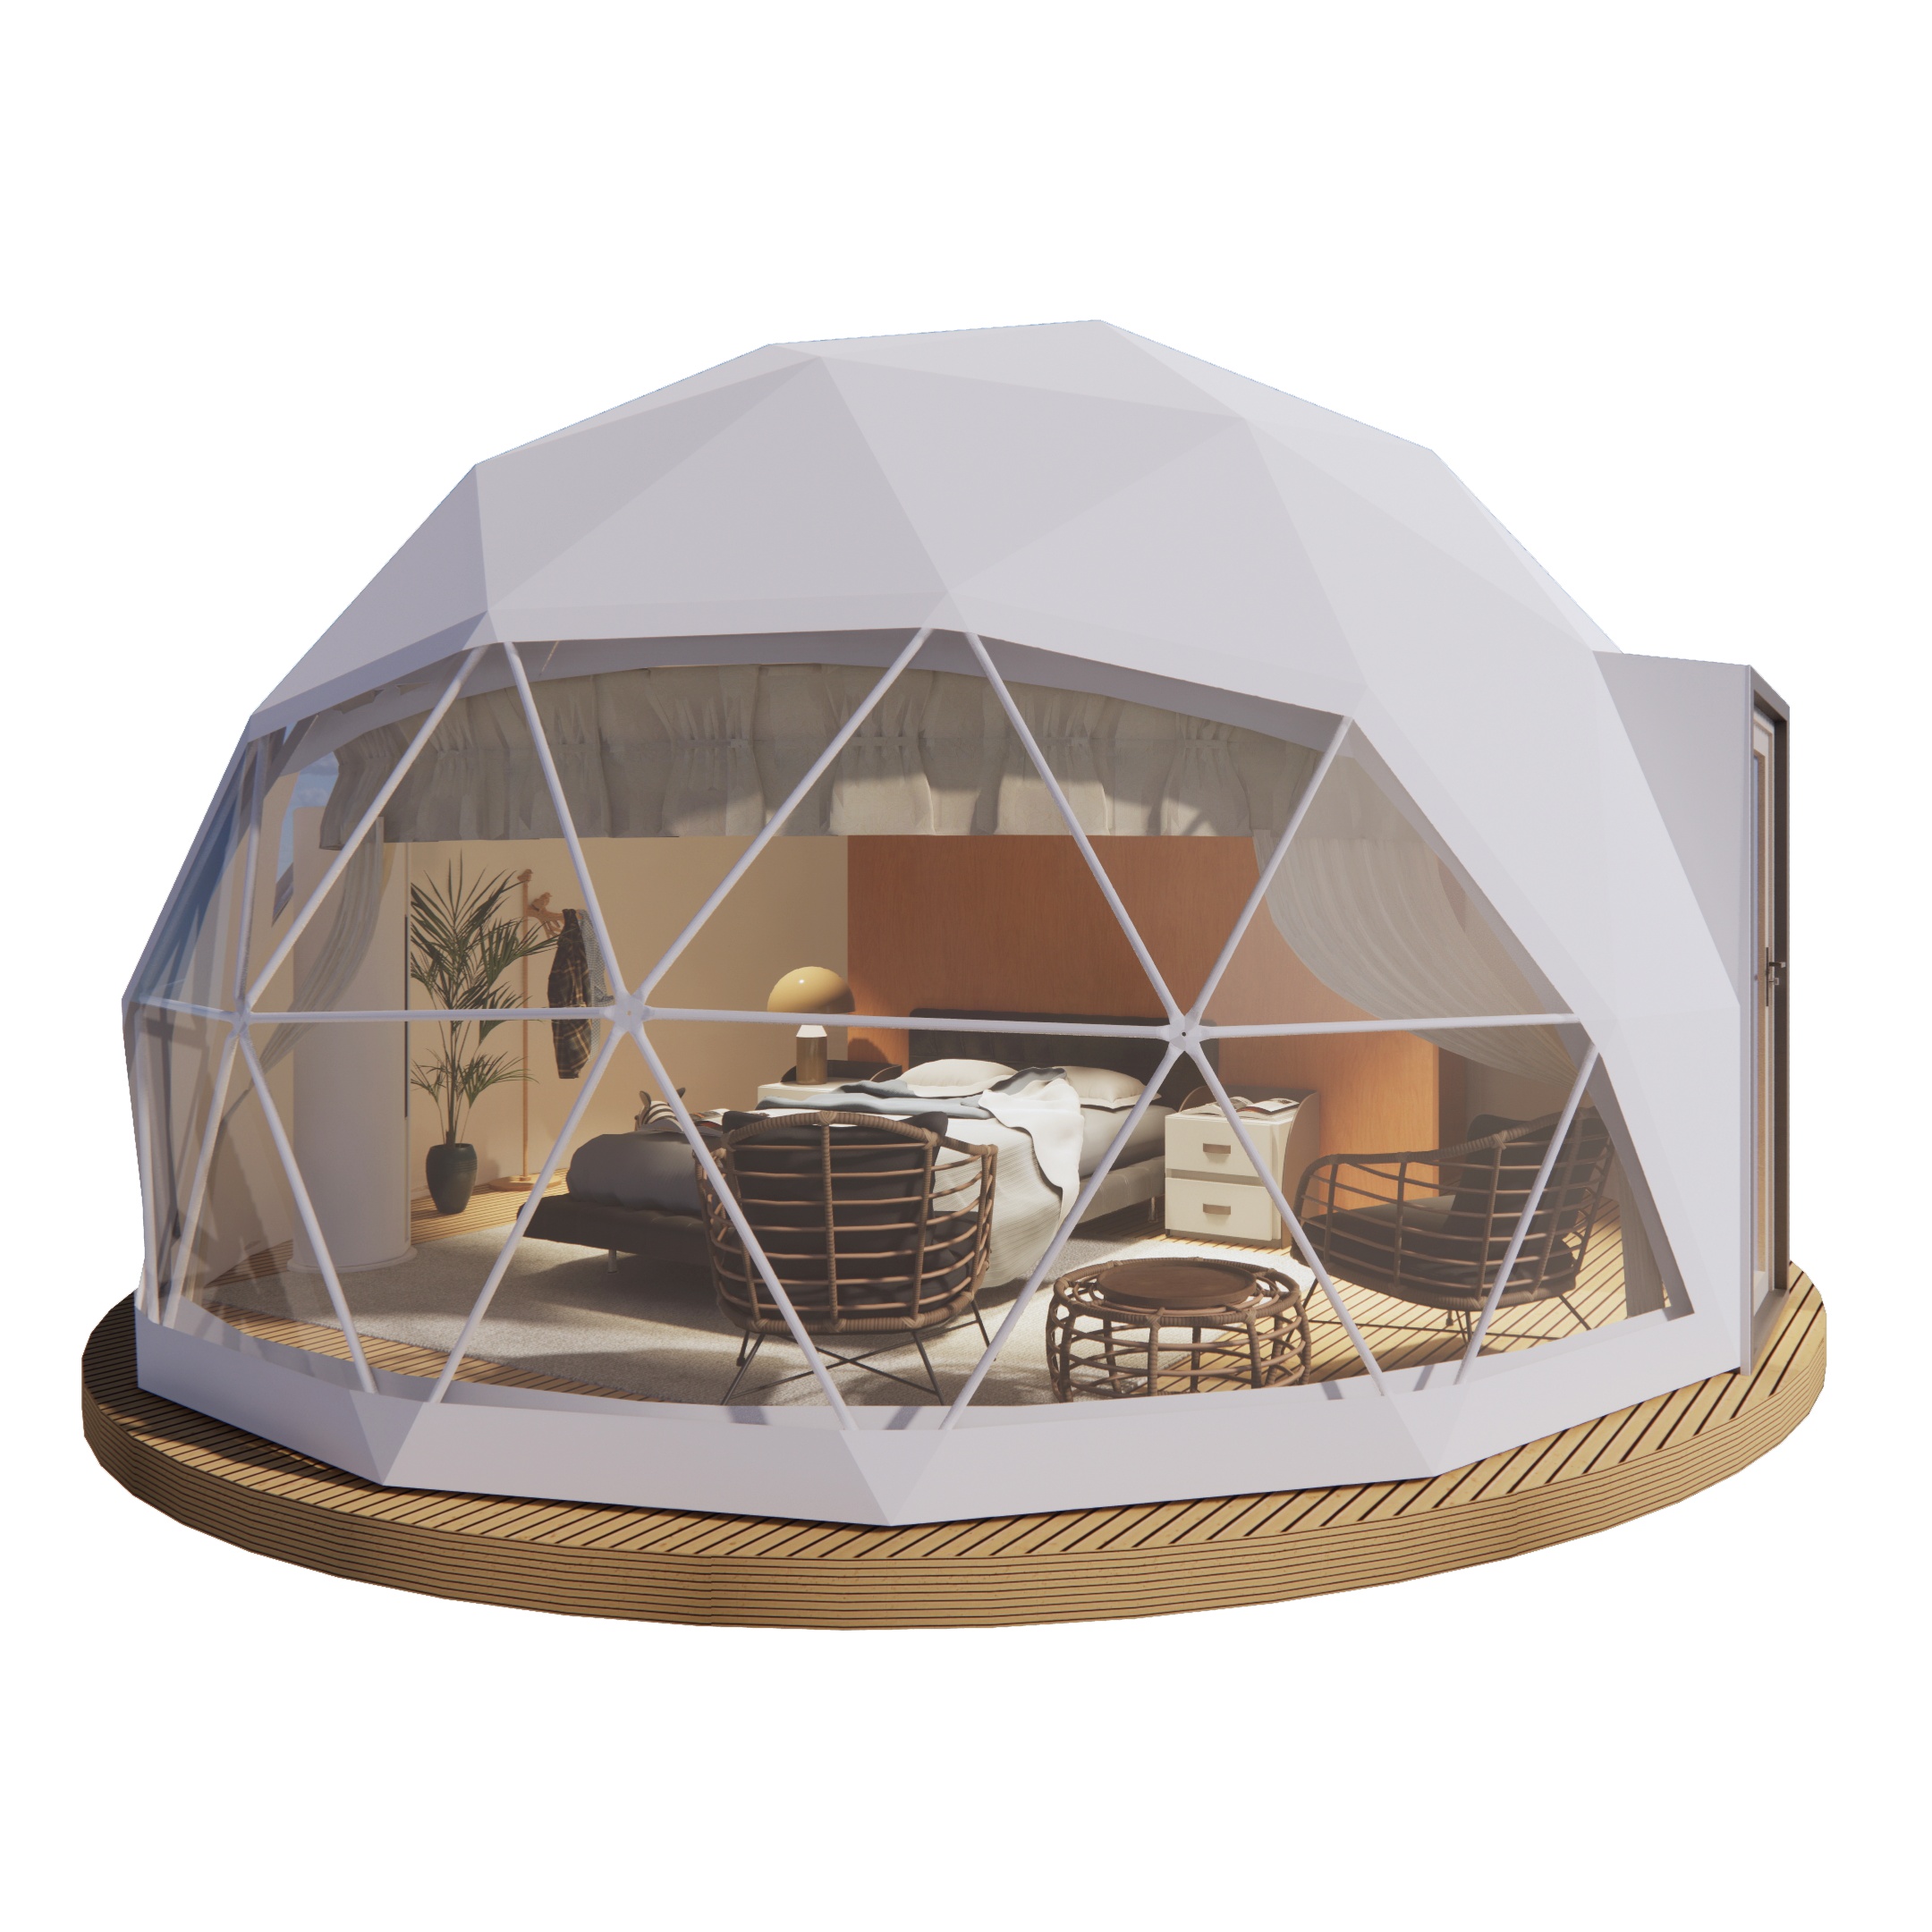 Starry Dome Tent